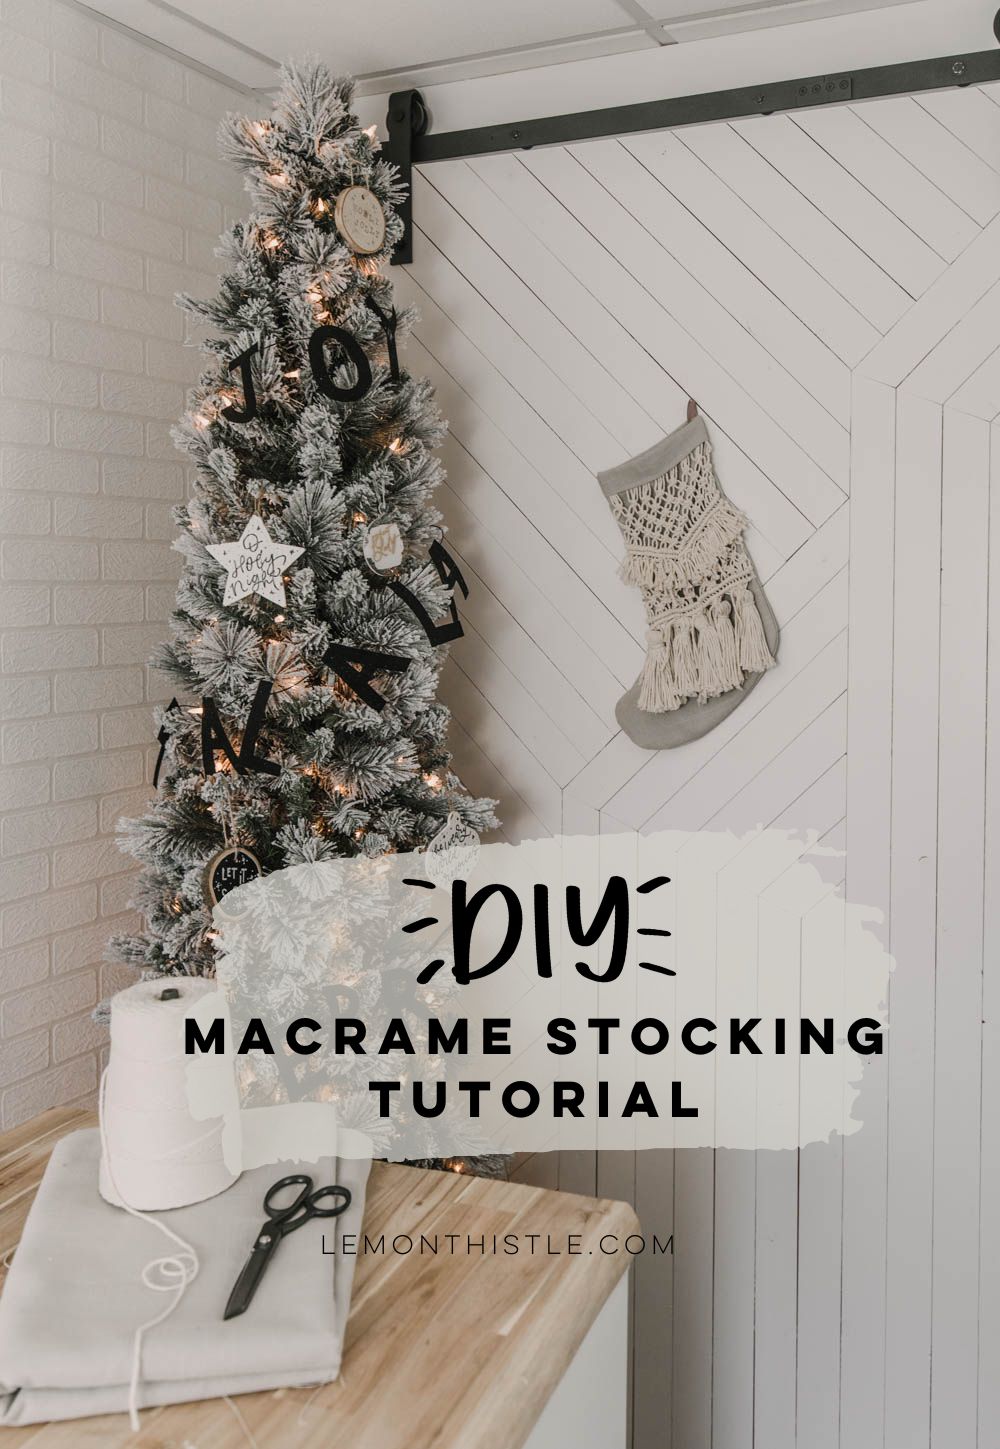 DIY Macrame Stocking tutorial text over image of stocking hung by skinny christmas tree